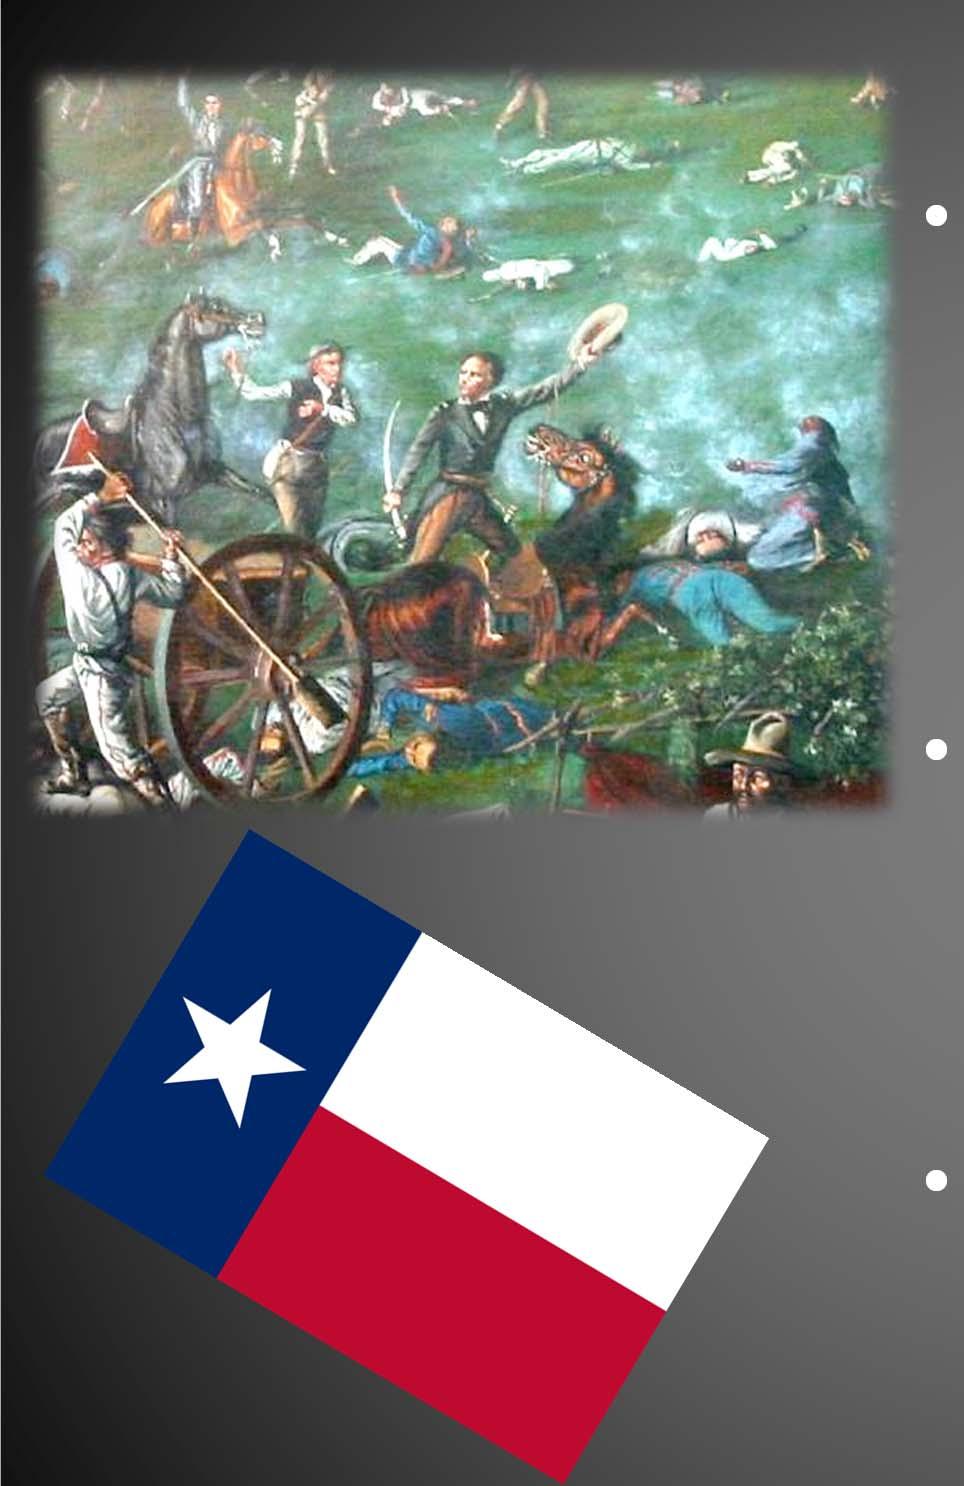 Sweet Revenge! Six weeks after the massacre at the Alamo, Sam Houston led a small force of Texans against the much larger army of Santa Anna.